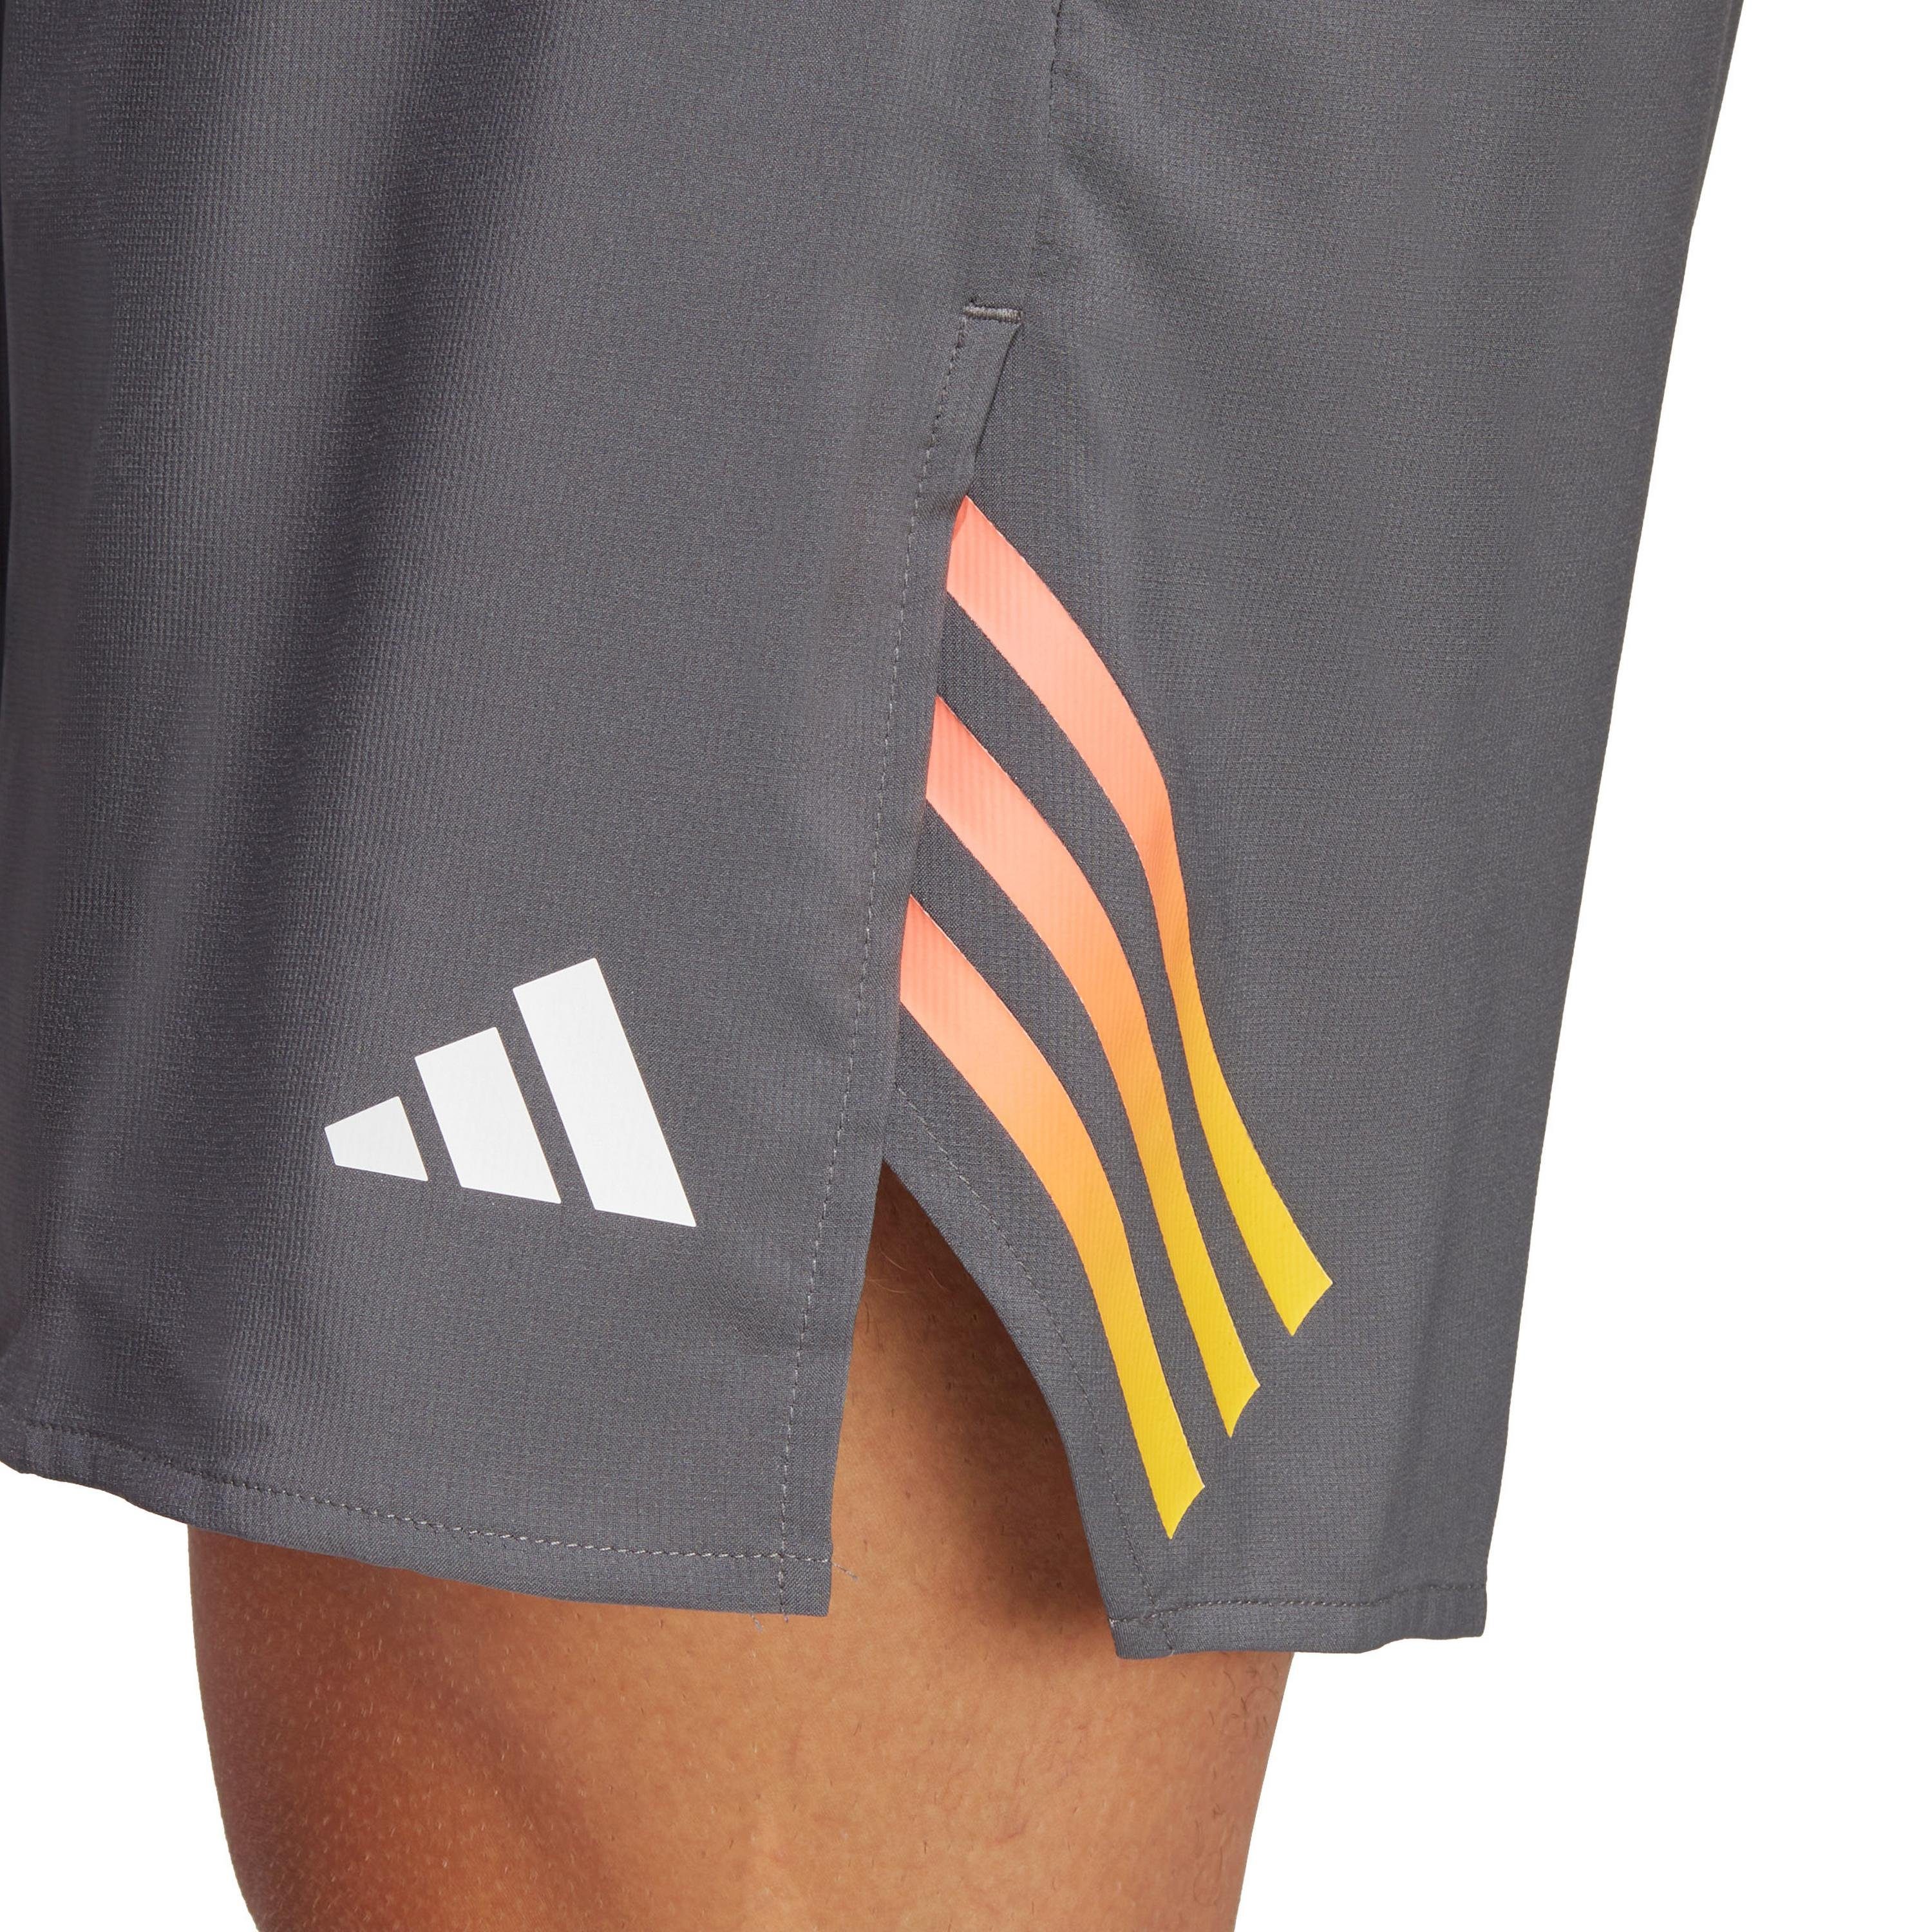 adidas Funktionsshorts five Performance grey